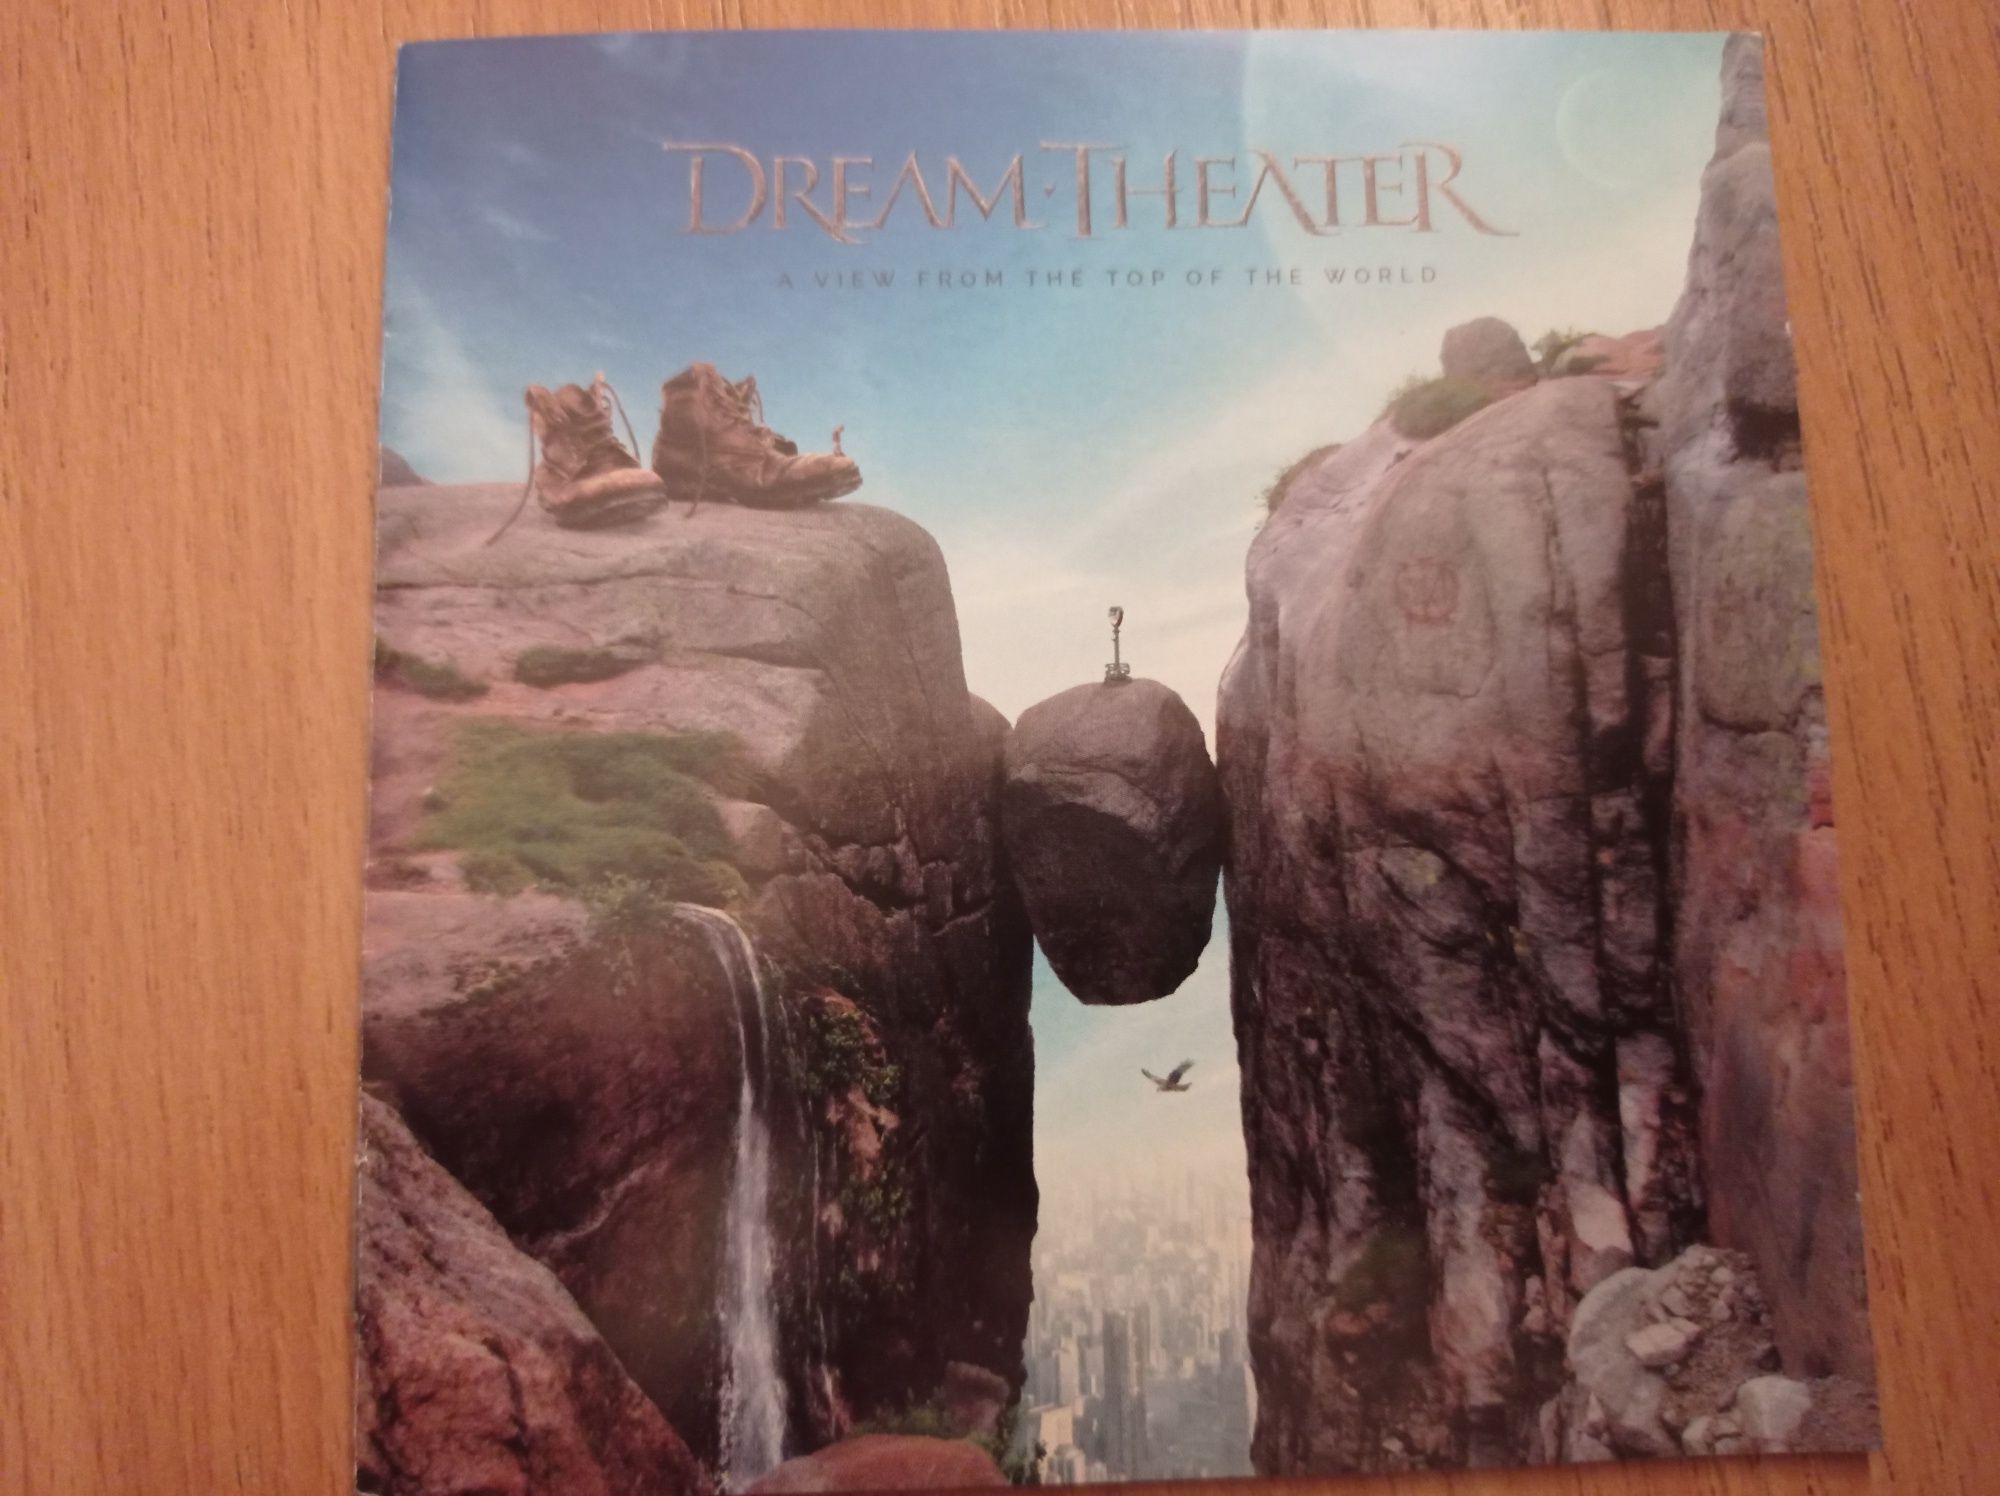 Dream Theater - A view From The top of The world